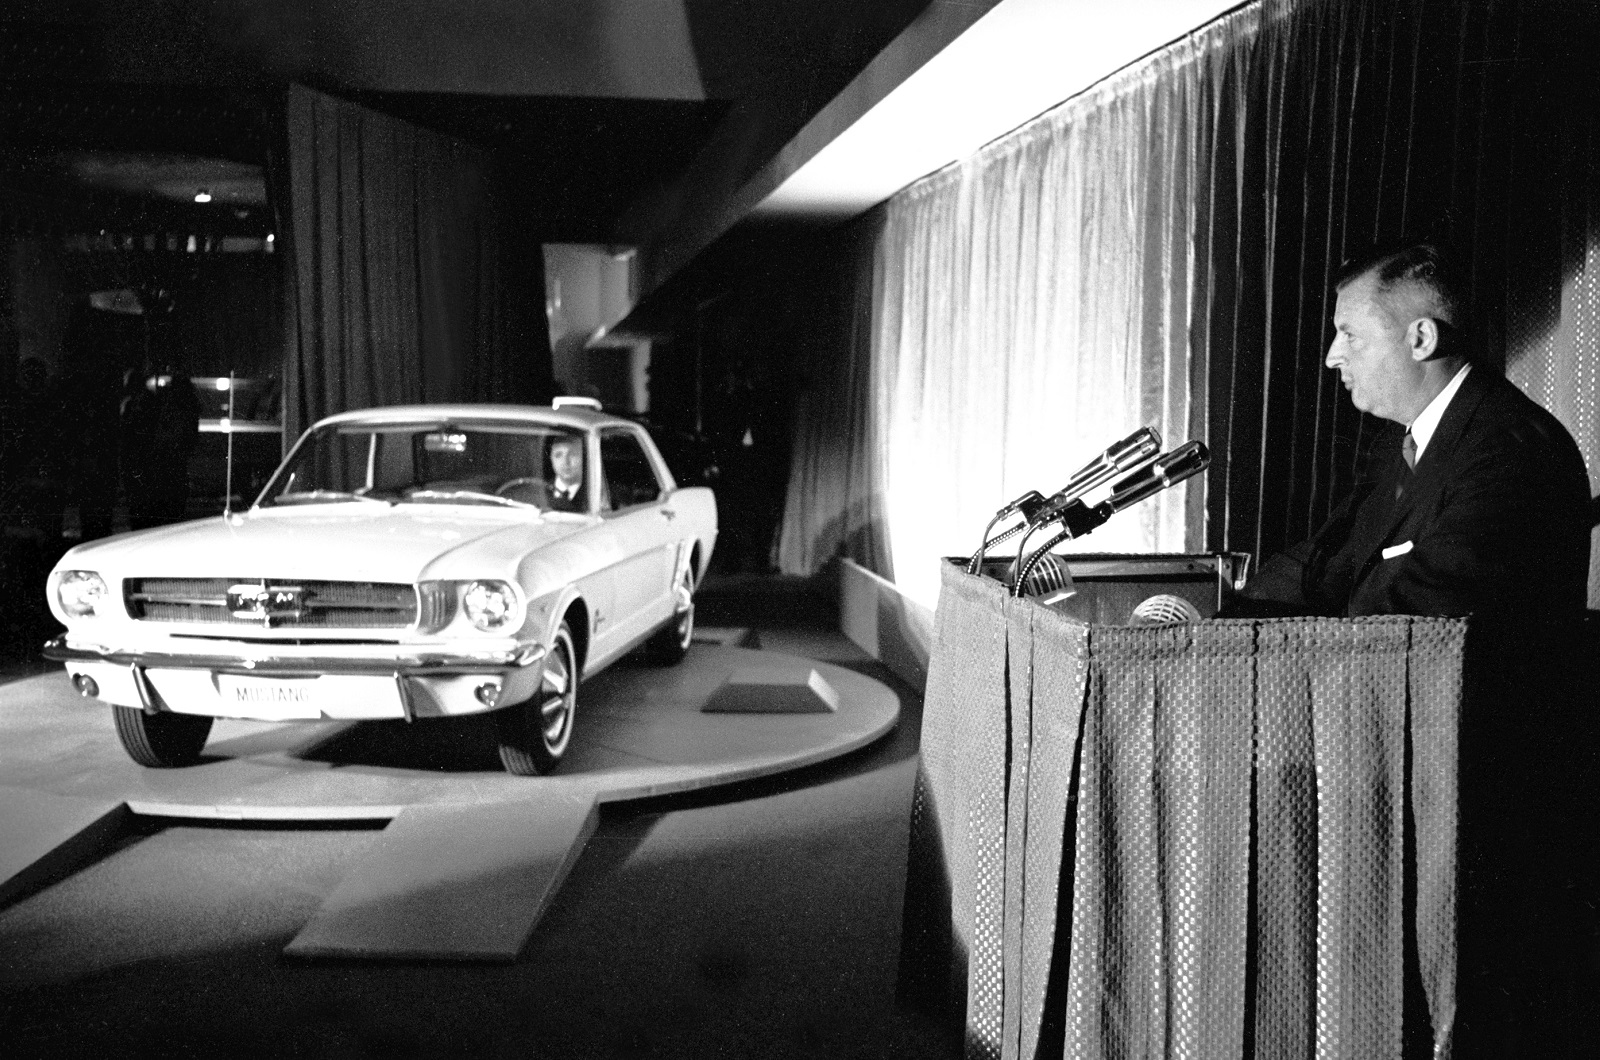 <p>Unveiled in New York City, the Falcon-based Ford Mustang became an instant hit; it was the must-have car of the year. Derived from the Falcon, Ford received <strong>22,000 orders</strong> within 24 hours of the car’s introduction, which was nearly a quarter of the <strong>100,000 cars</strong> it hoped to sell annually. <strong>Over 418,000 units</strong> had found a home by its first birthday, a number that would have made it one of the five best-selling vehicles in America today.</p><p>Today, the Mustang remains Ford’s affordable dream car and by some measures is the world's best-selling sports car. An all-new seventh generation model was unveiled in September 2022.</p>